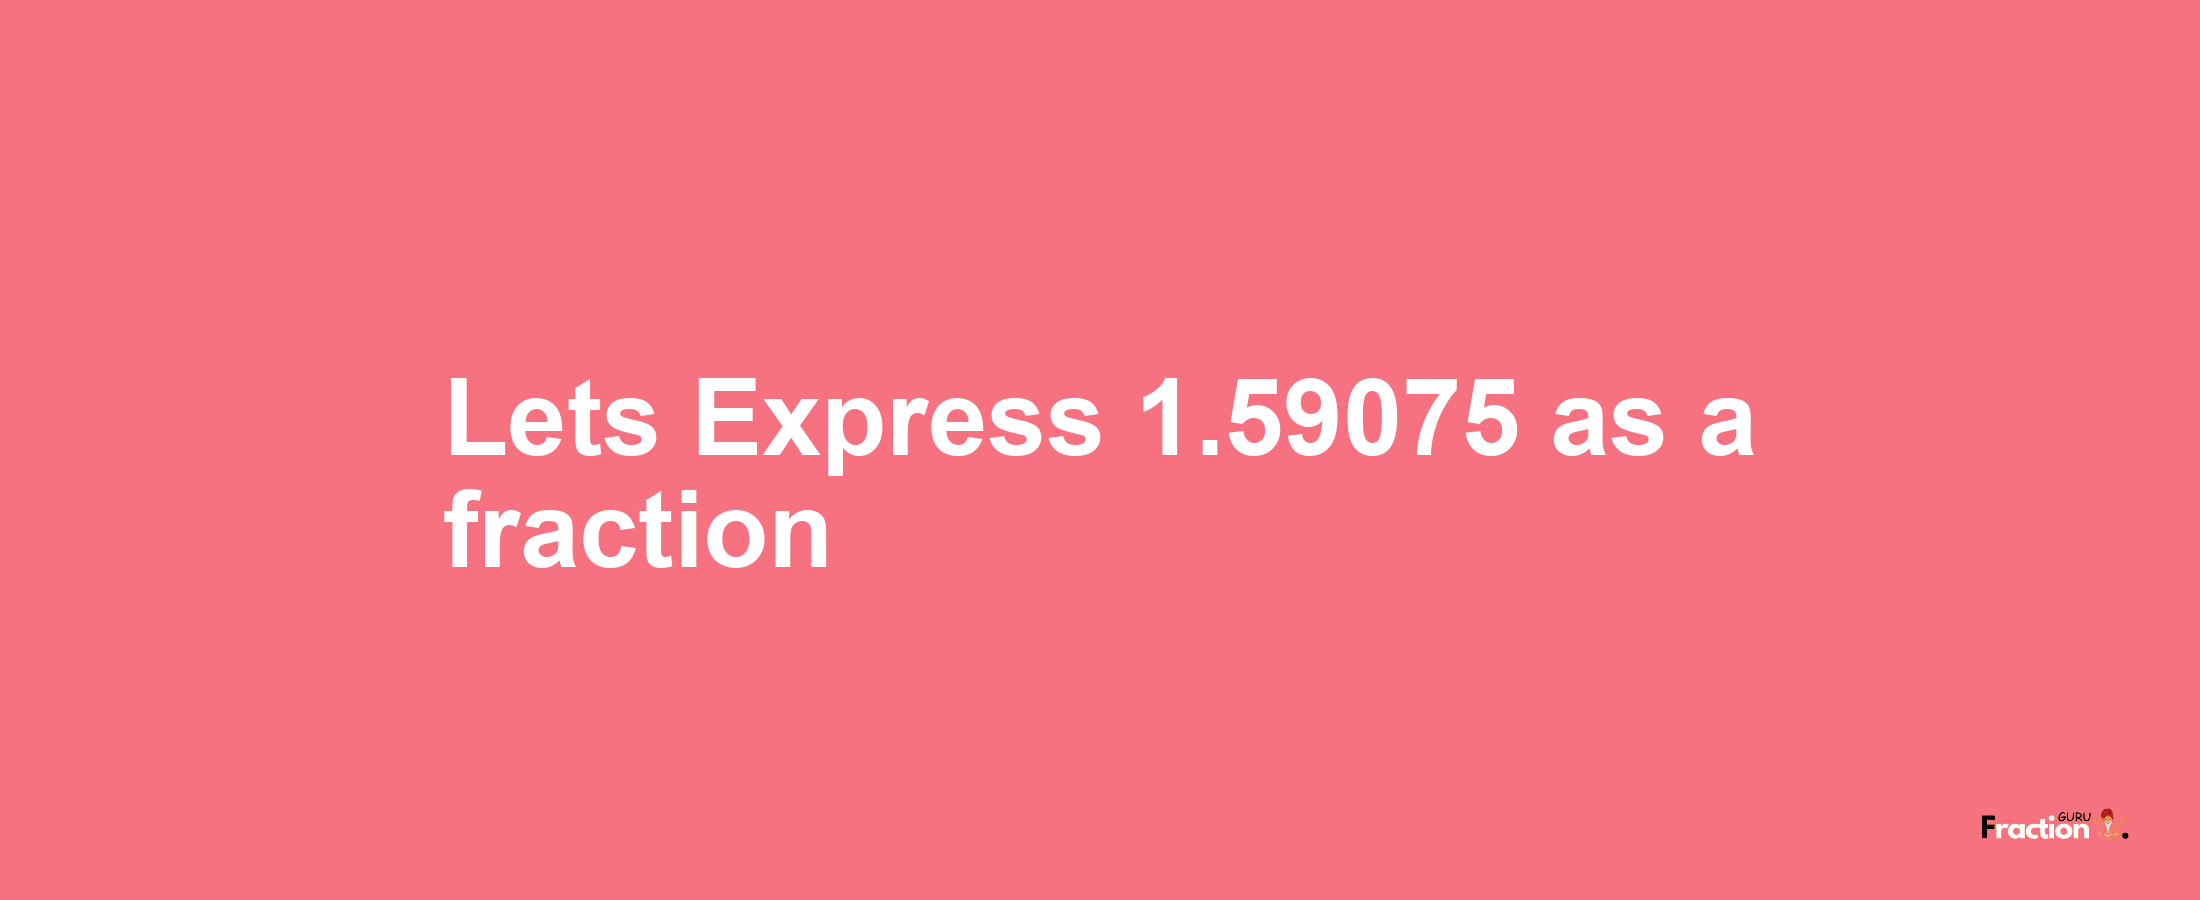 Lets Express 1.59075 as afraction